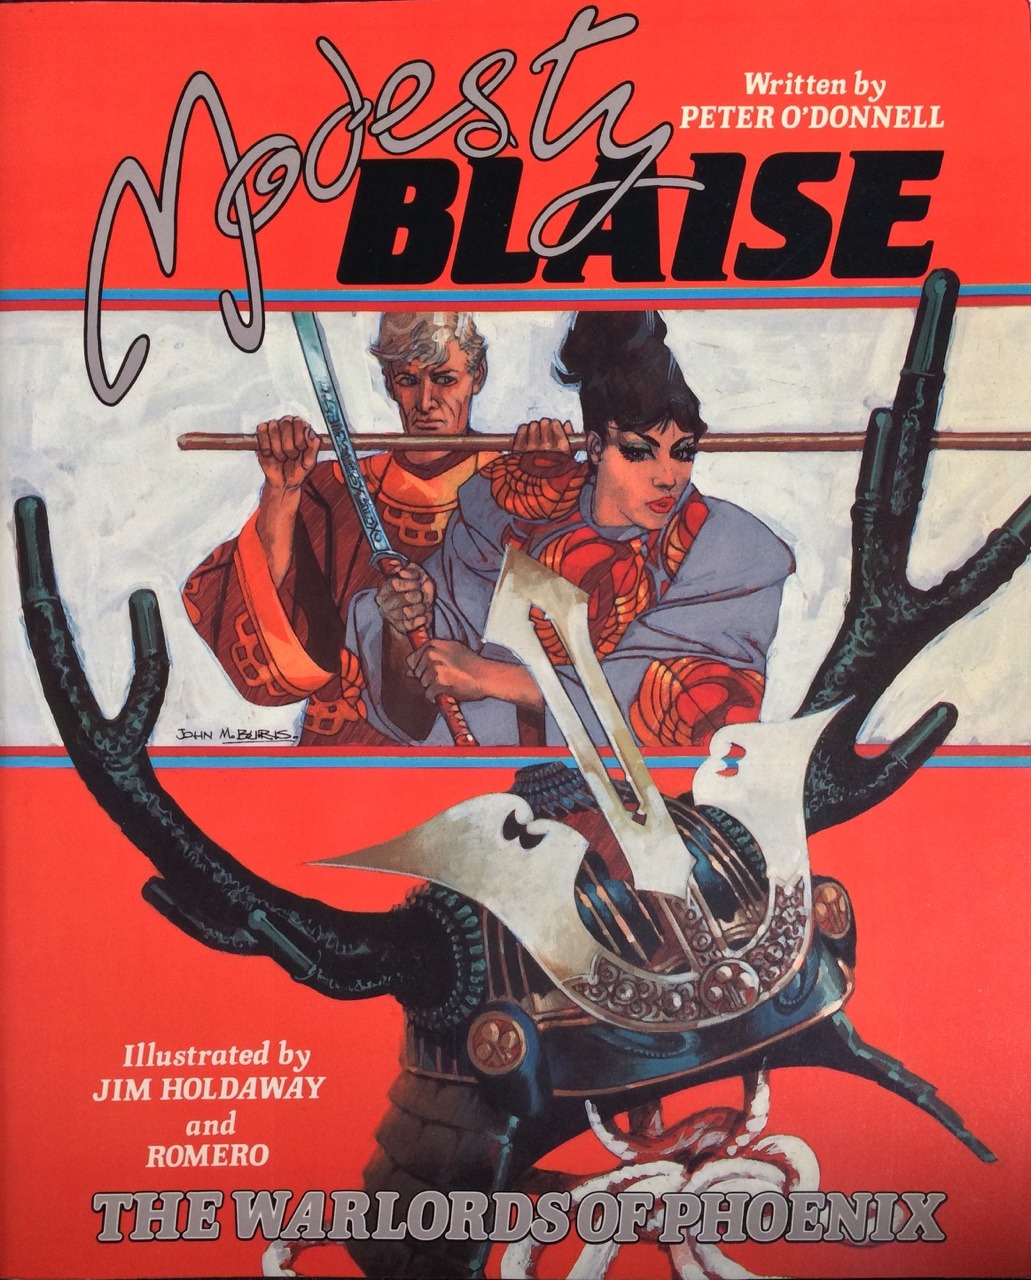 Modesty Blaise: The Warlords of Phoenix, written by Peter O’Donnell, illustrated